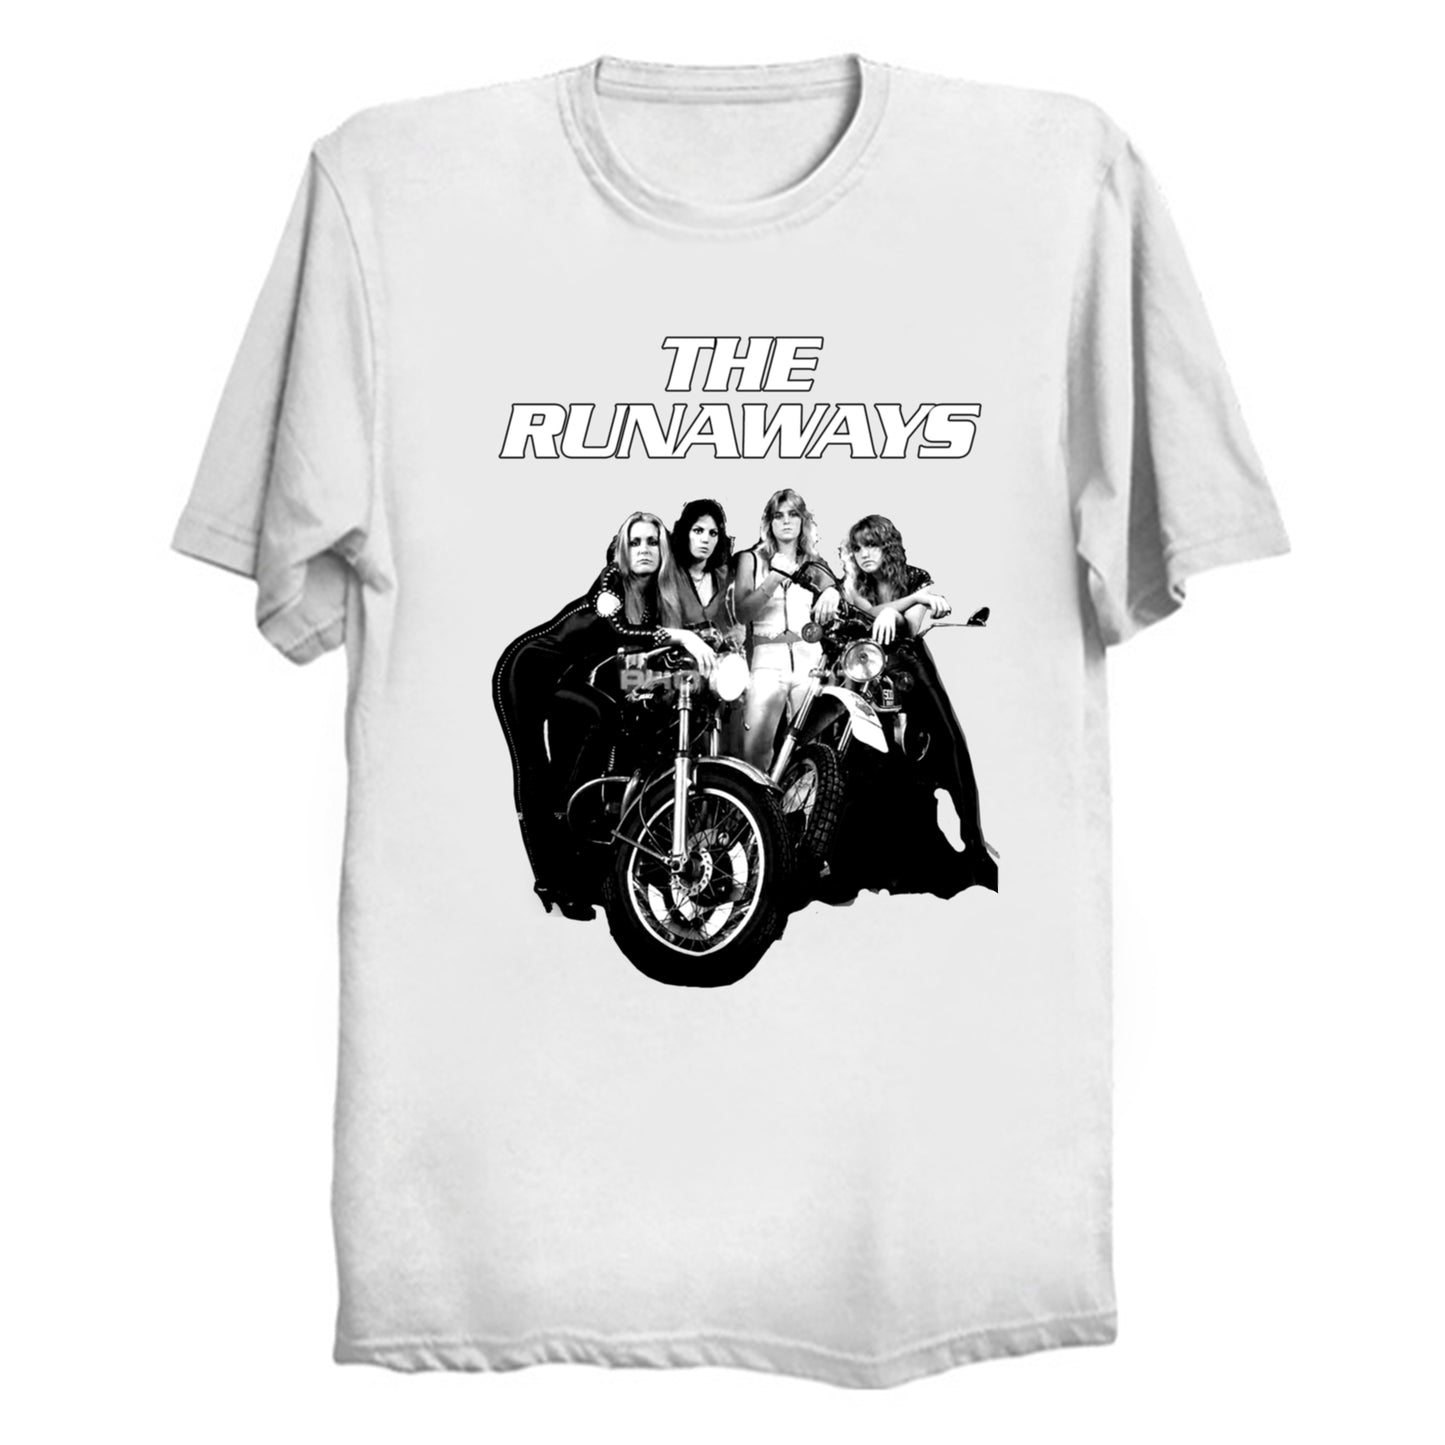 Joan Jett and The Runaways Queens Of Noise T-Shirt